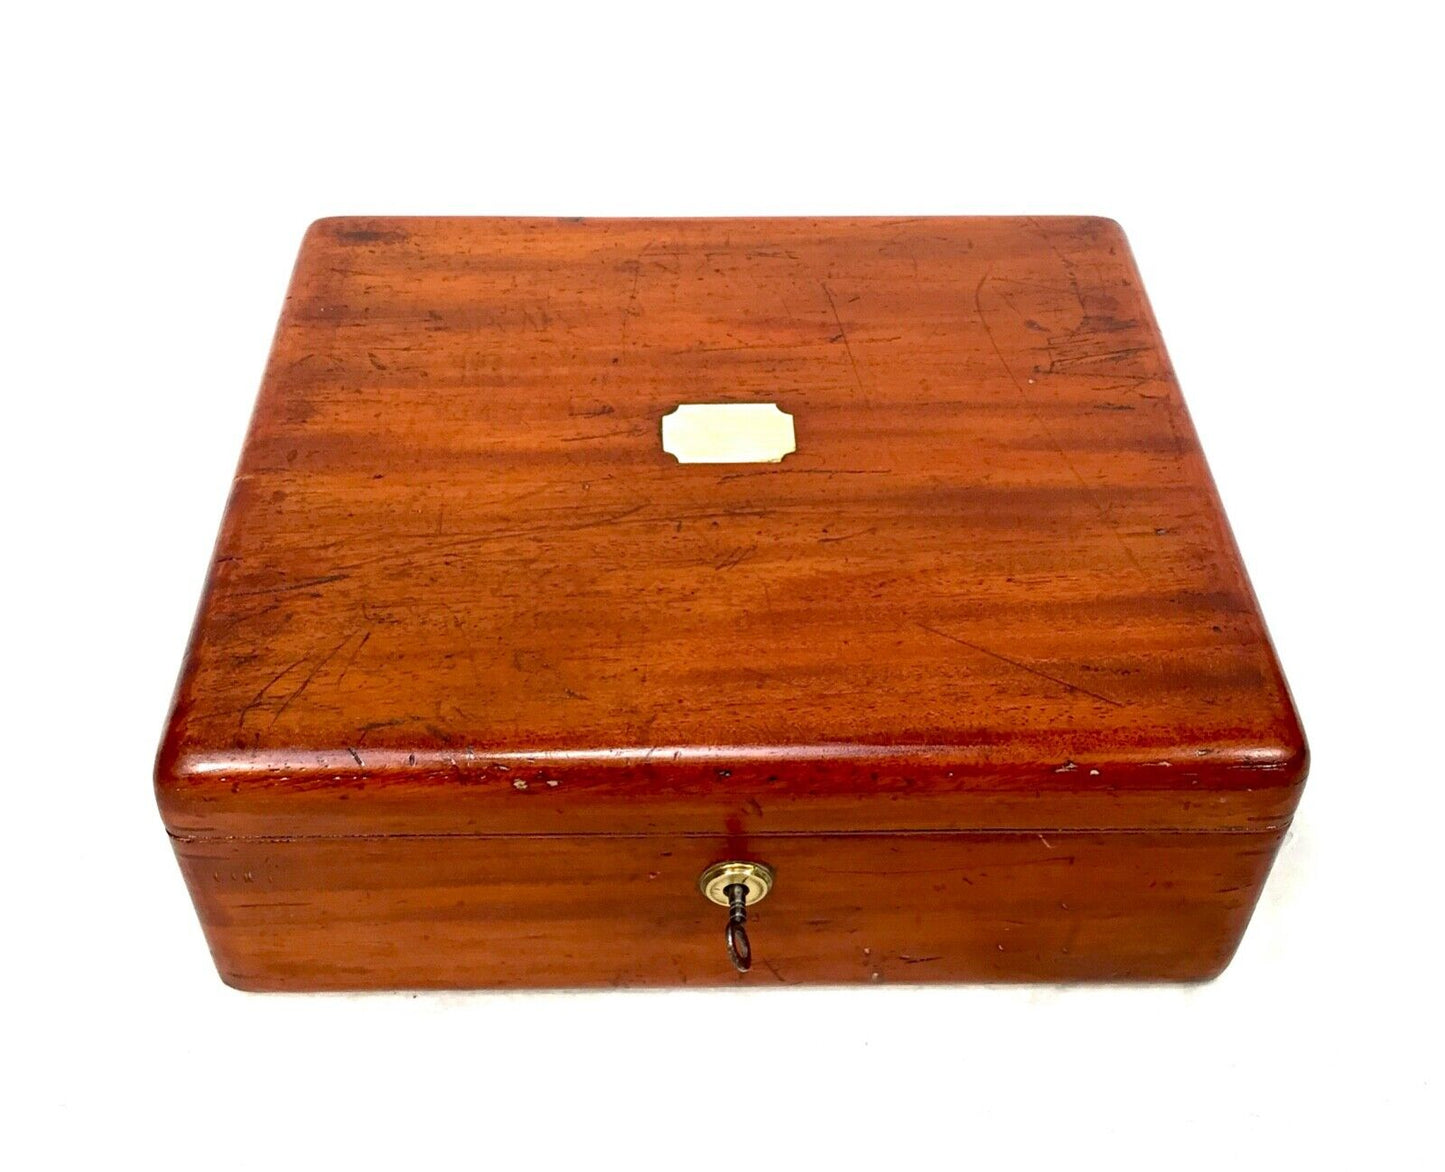 Antique Mahogany Wooden Collectors Box / Cabinet With Key & Working Lock c1900